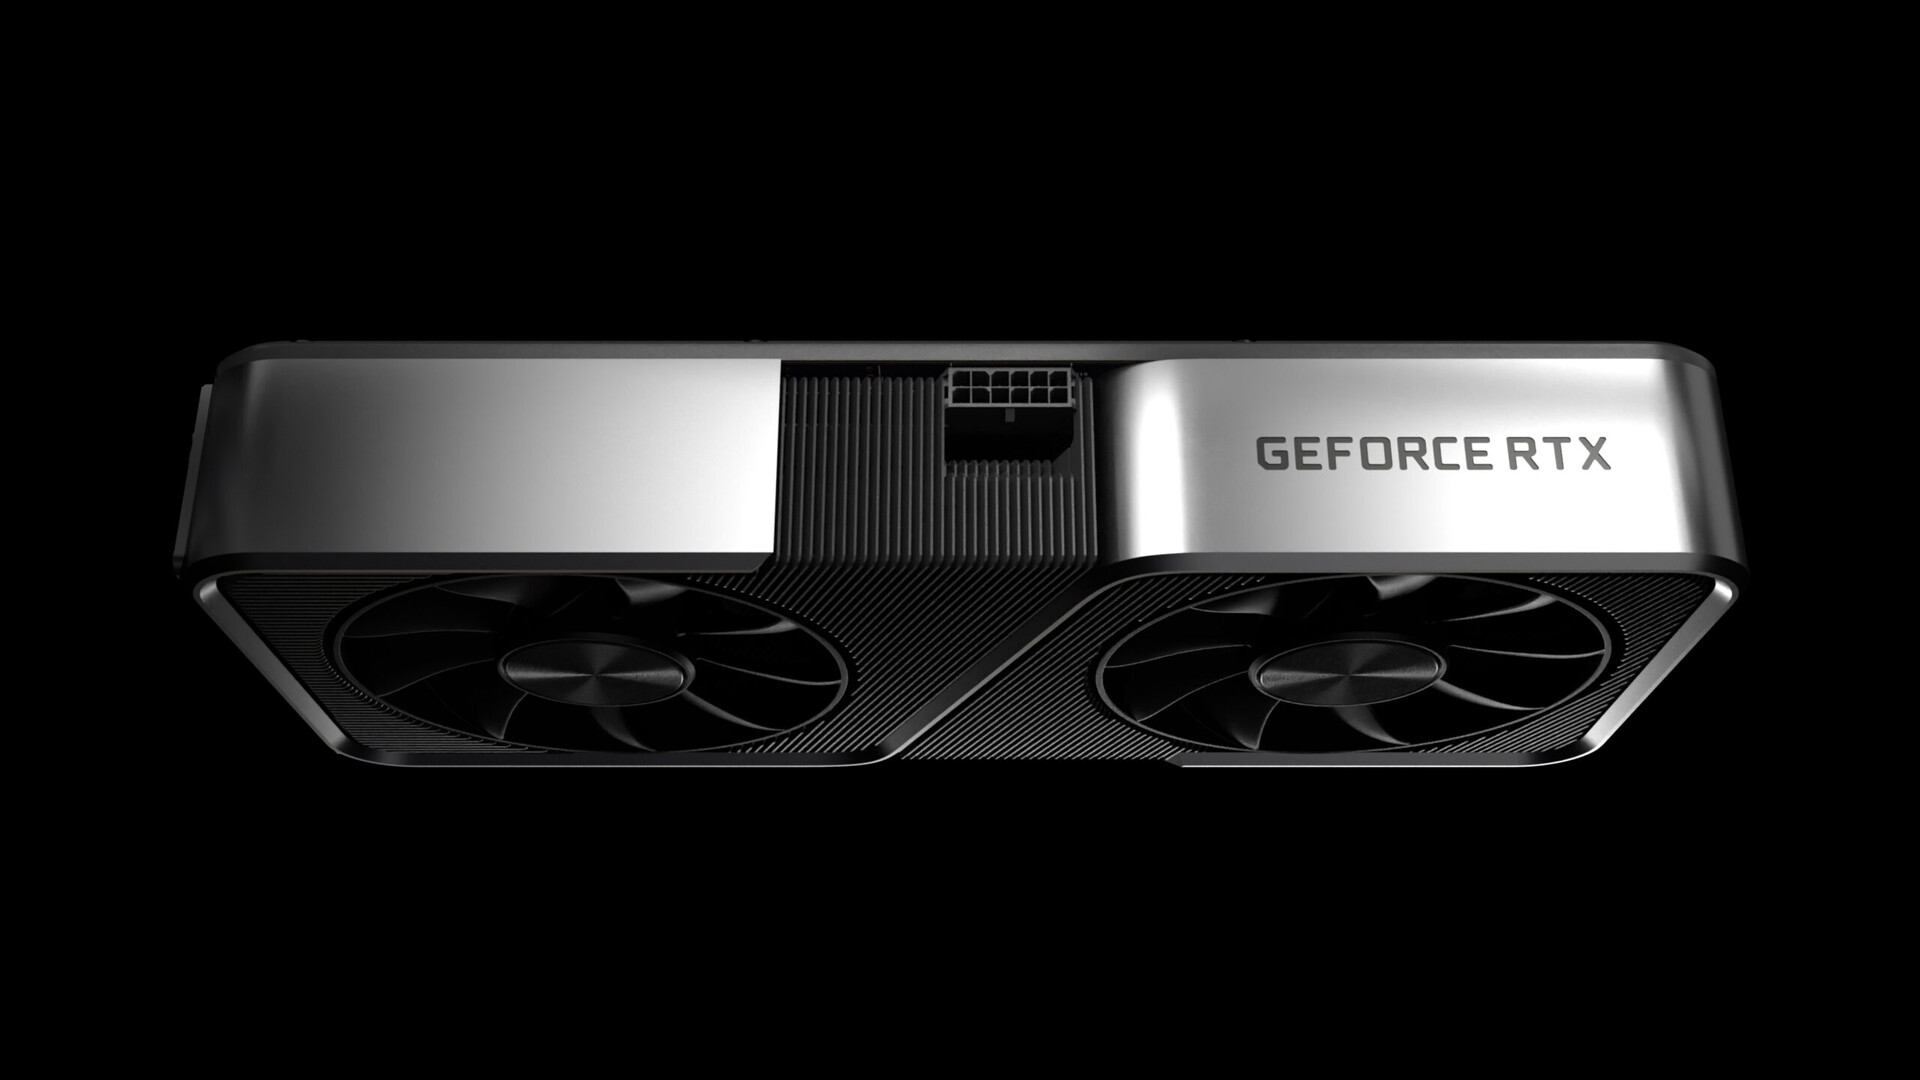 PCI IDs shed light on the NVIDIA GeForce RTX 3050 and GeForce RTX 